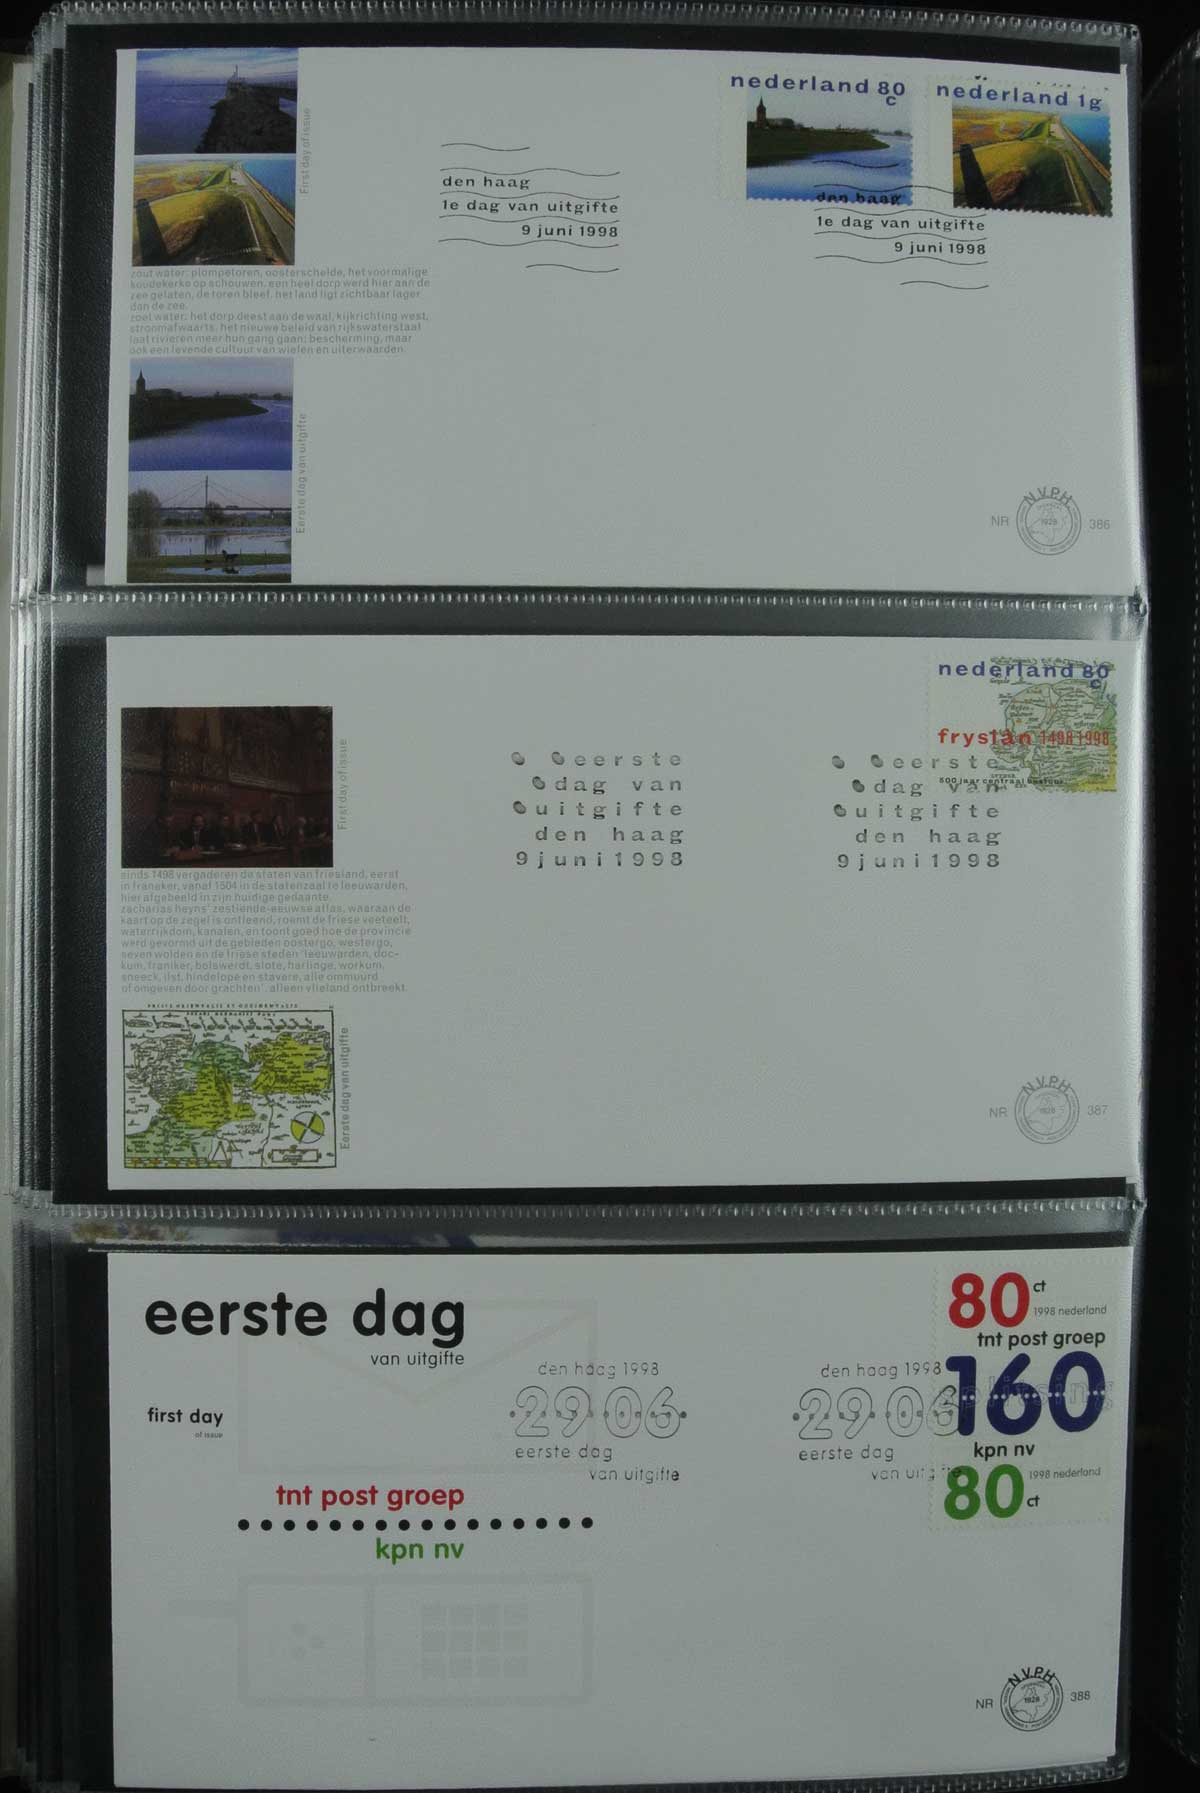 26836 018 - 26836 Netherlands FDC's 1995-2012.